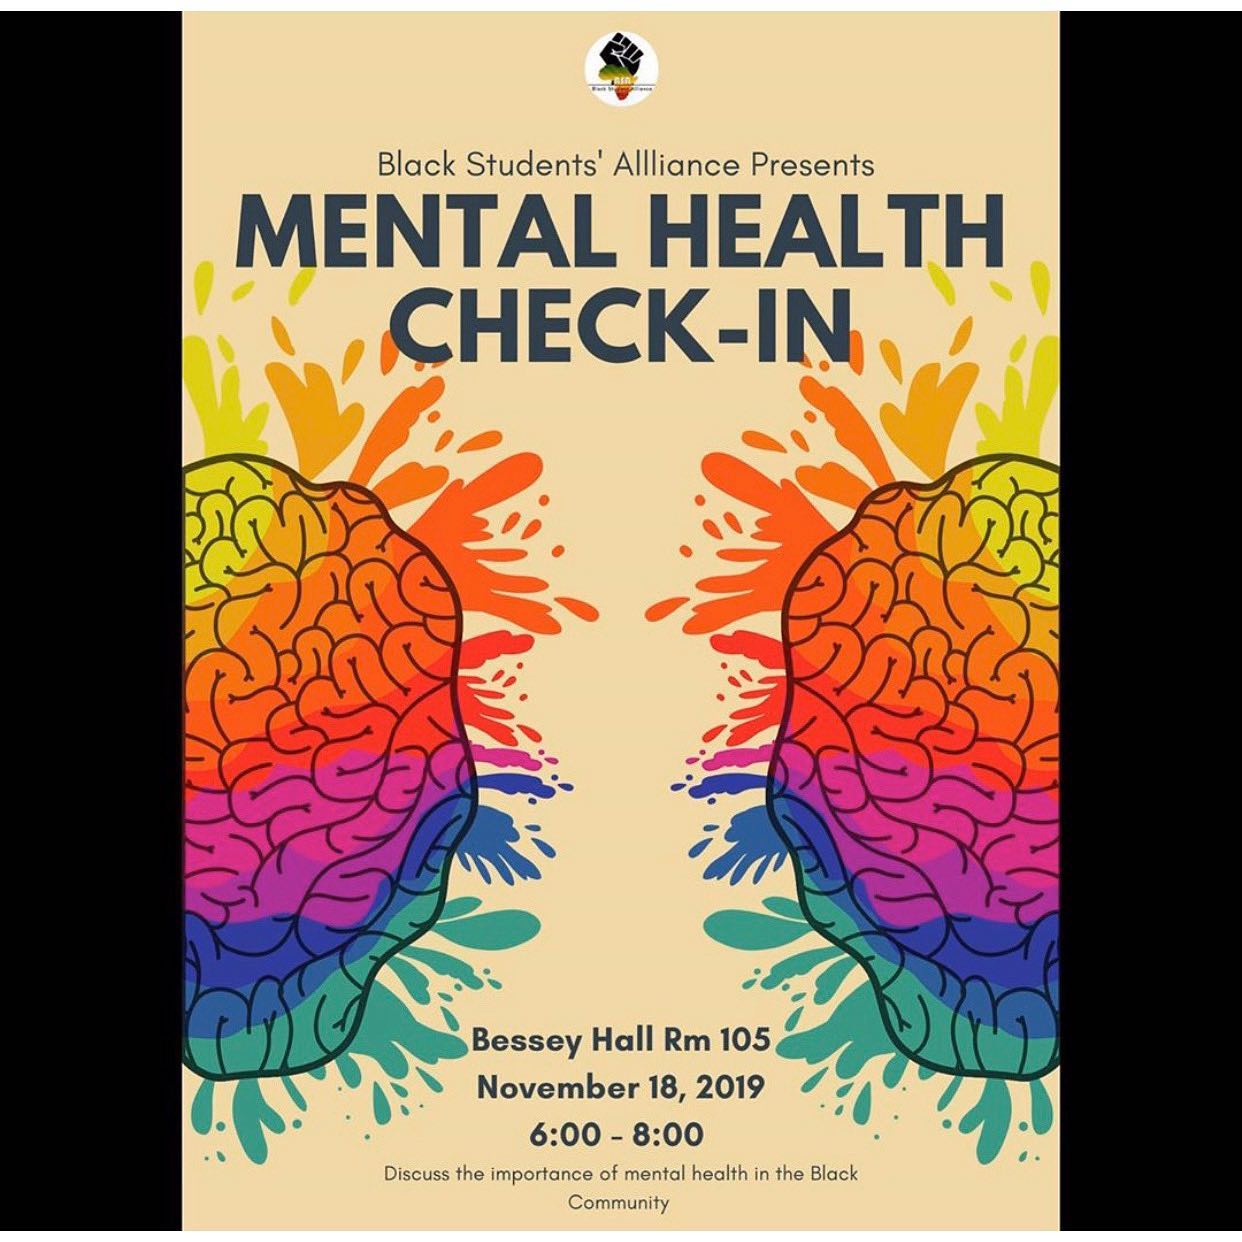 Black Student Alliance Presents: Mental Health Check-In